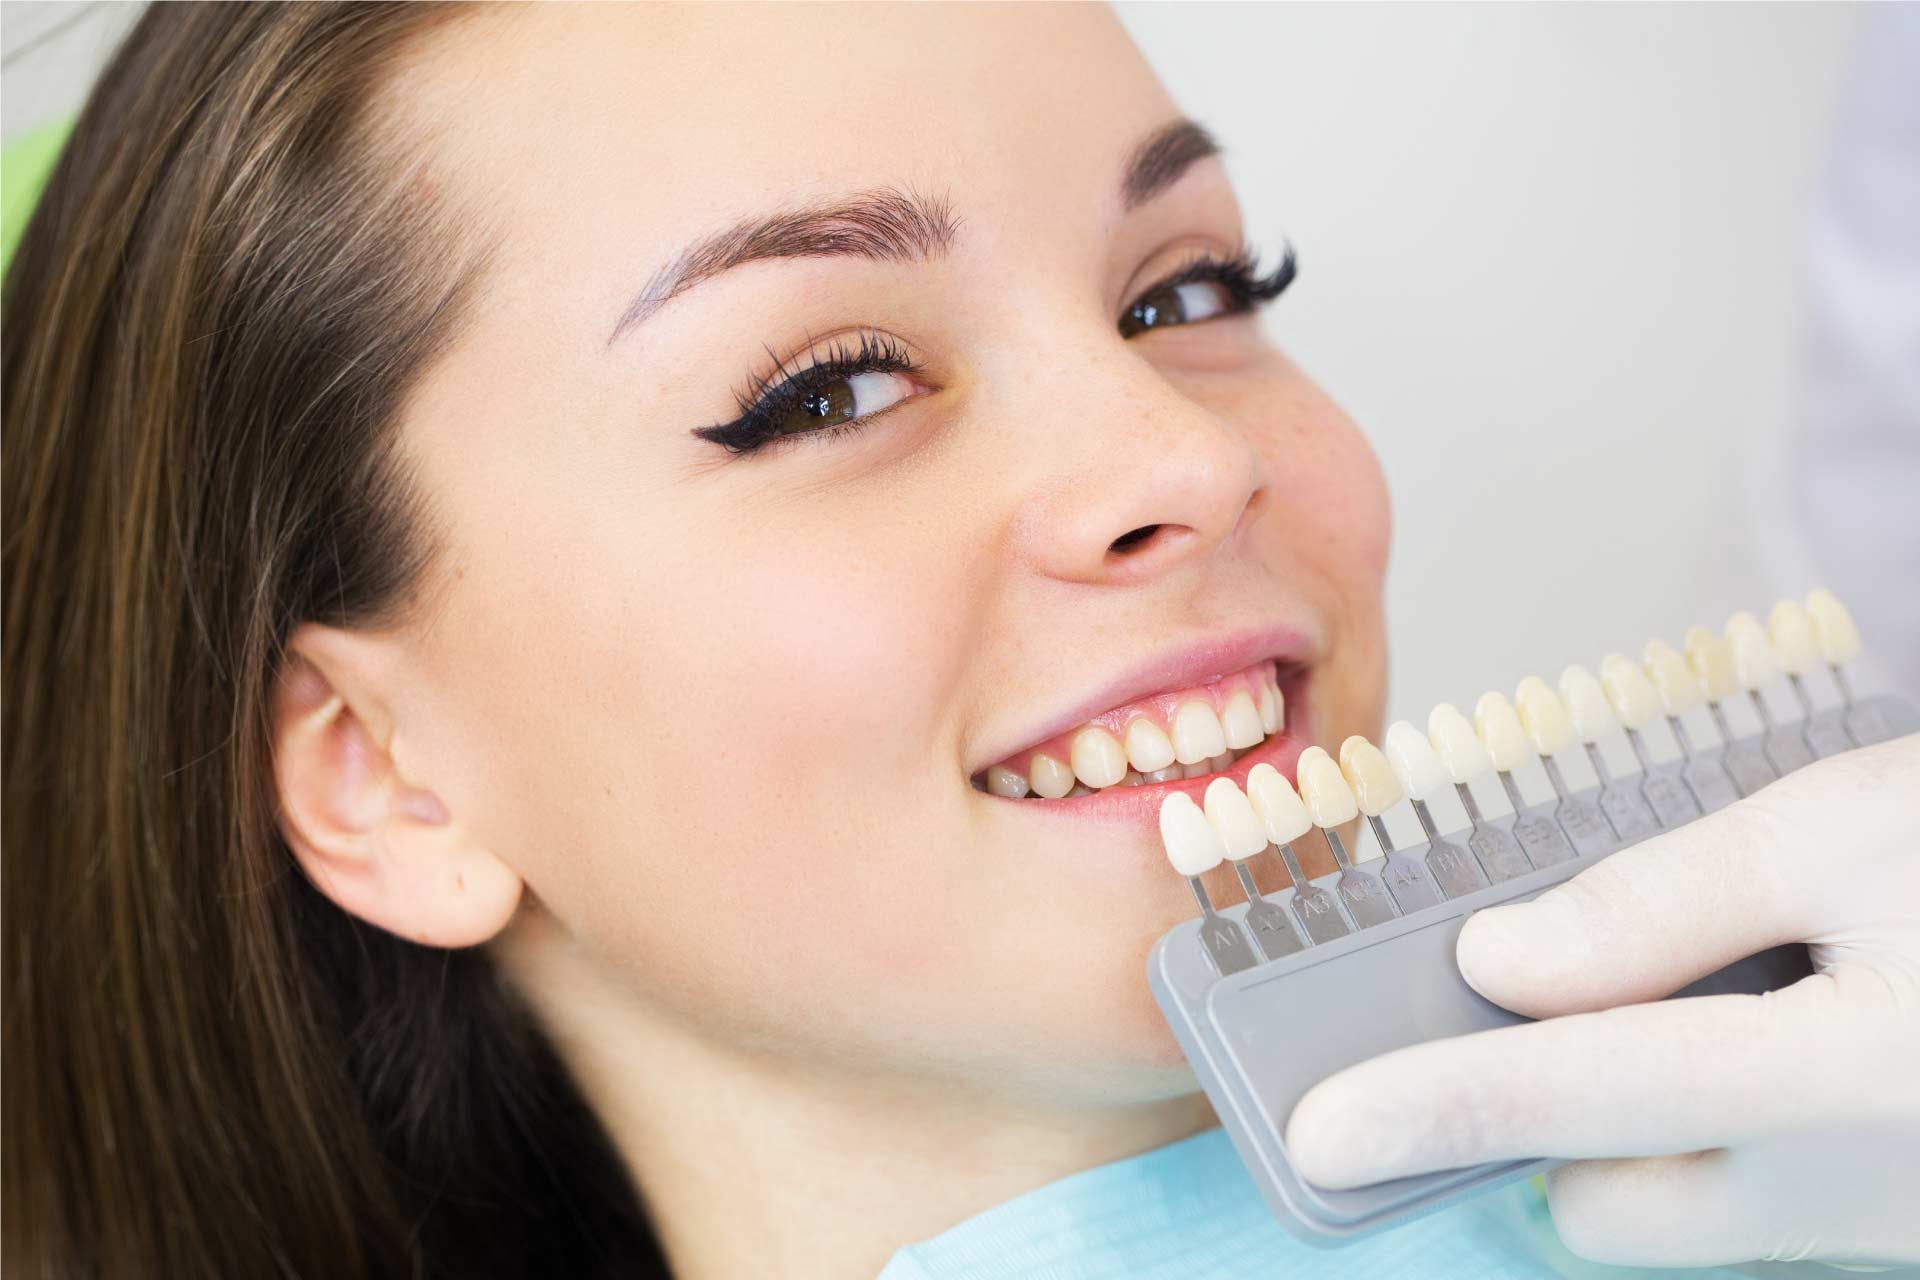 Effective and reliable treatment for teeth whitening: Bleaching